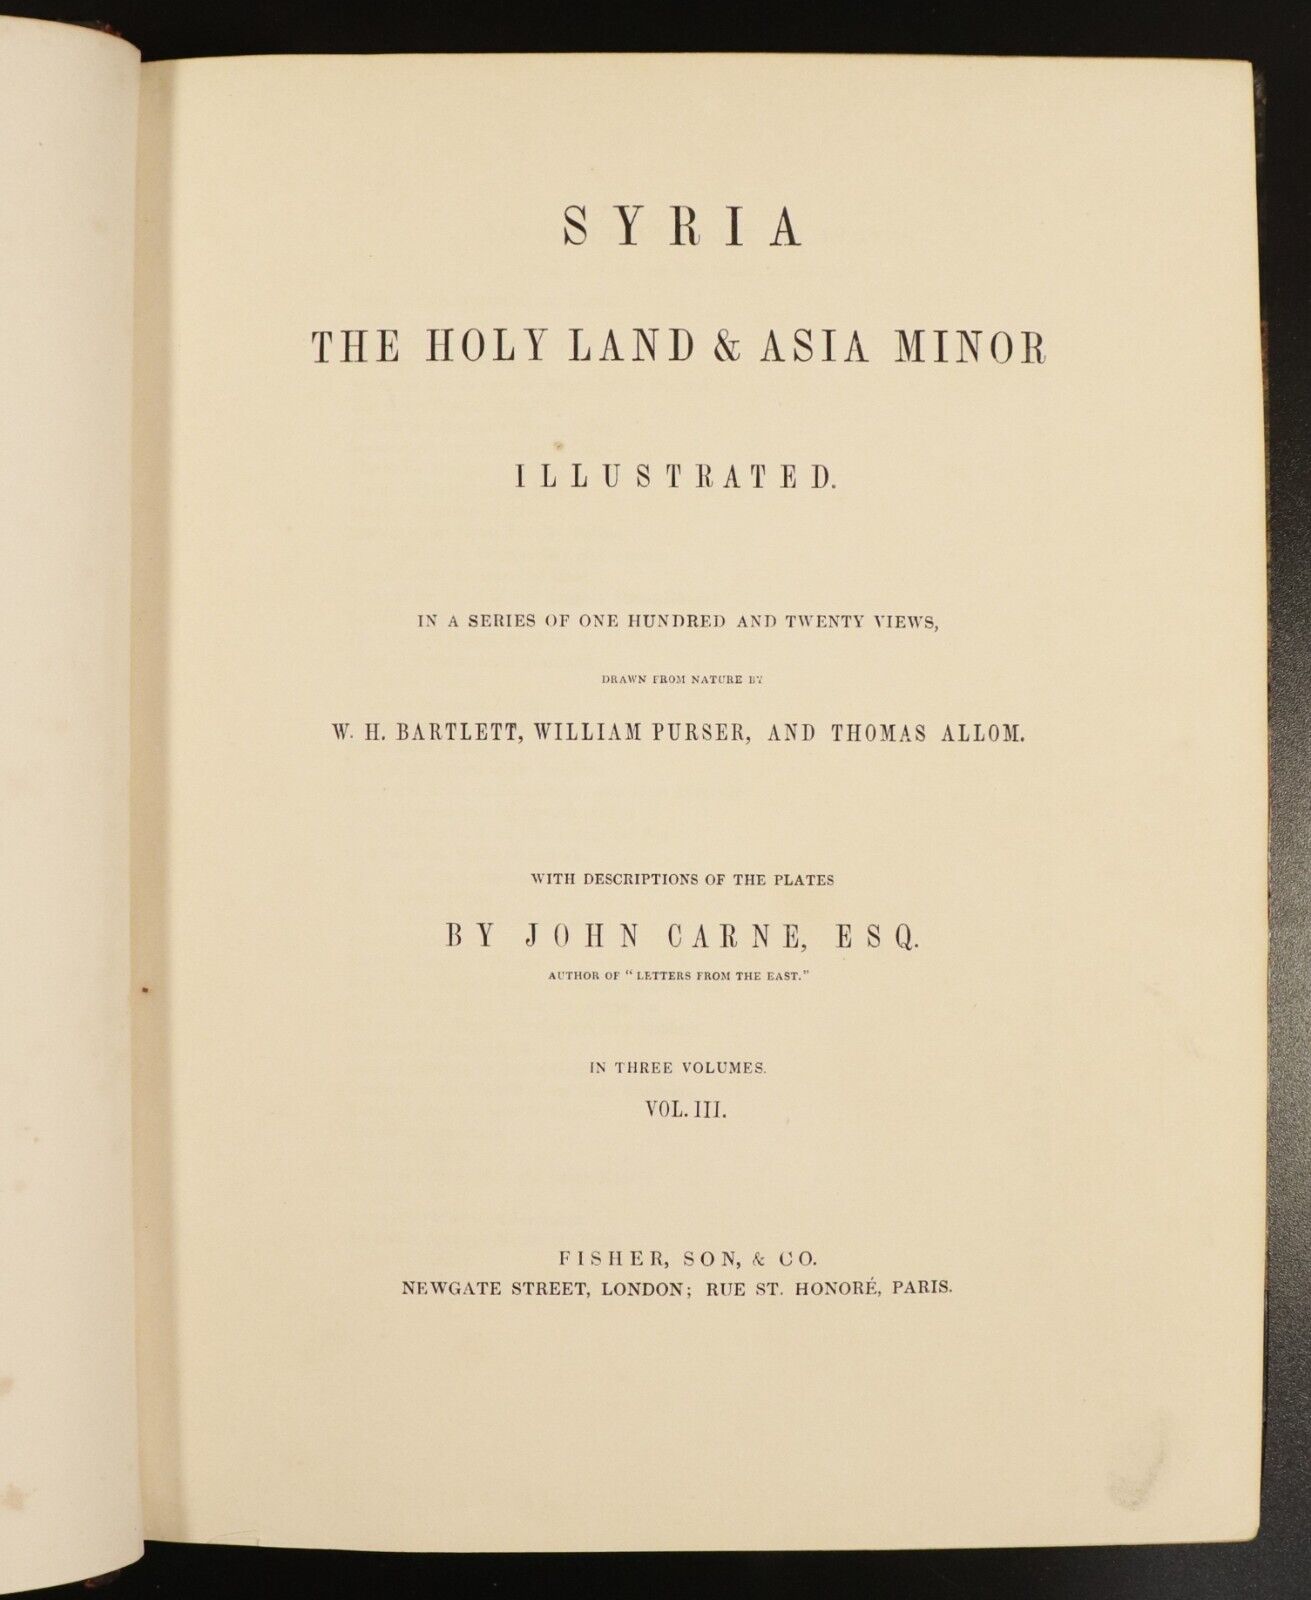 c1842 3vol Syria, The Holy Land & Asia Minor - Antiquarian History Book Set